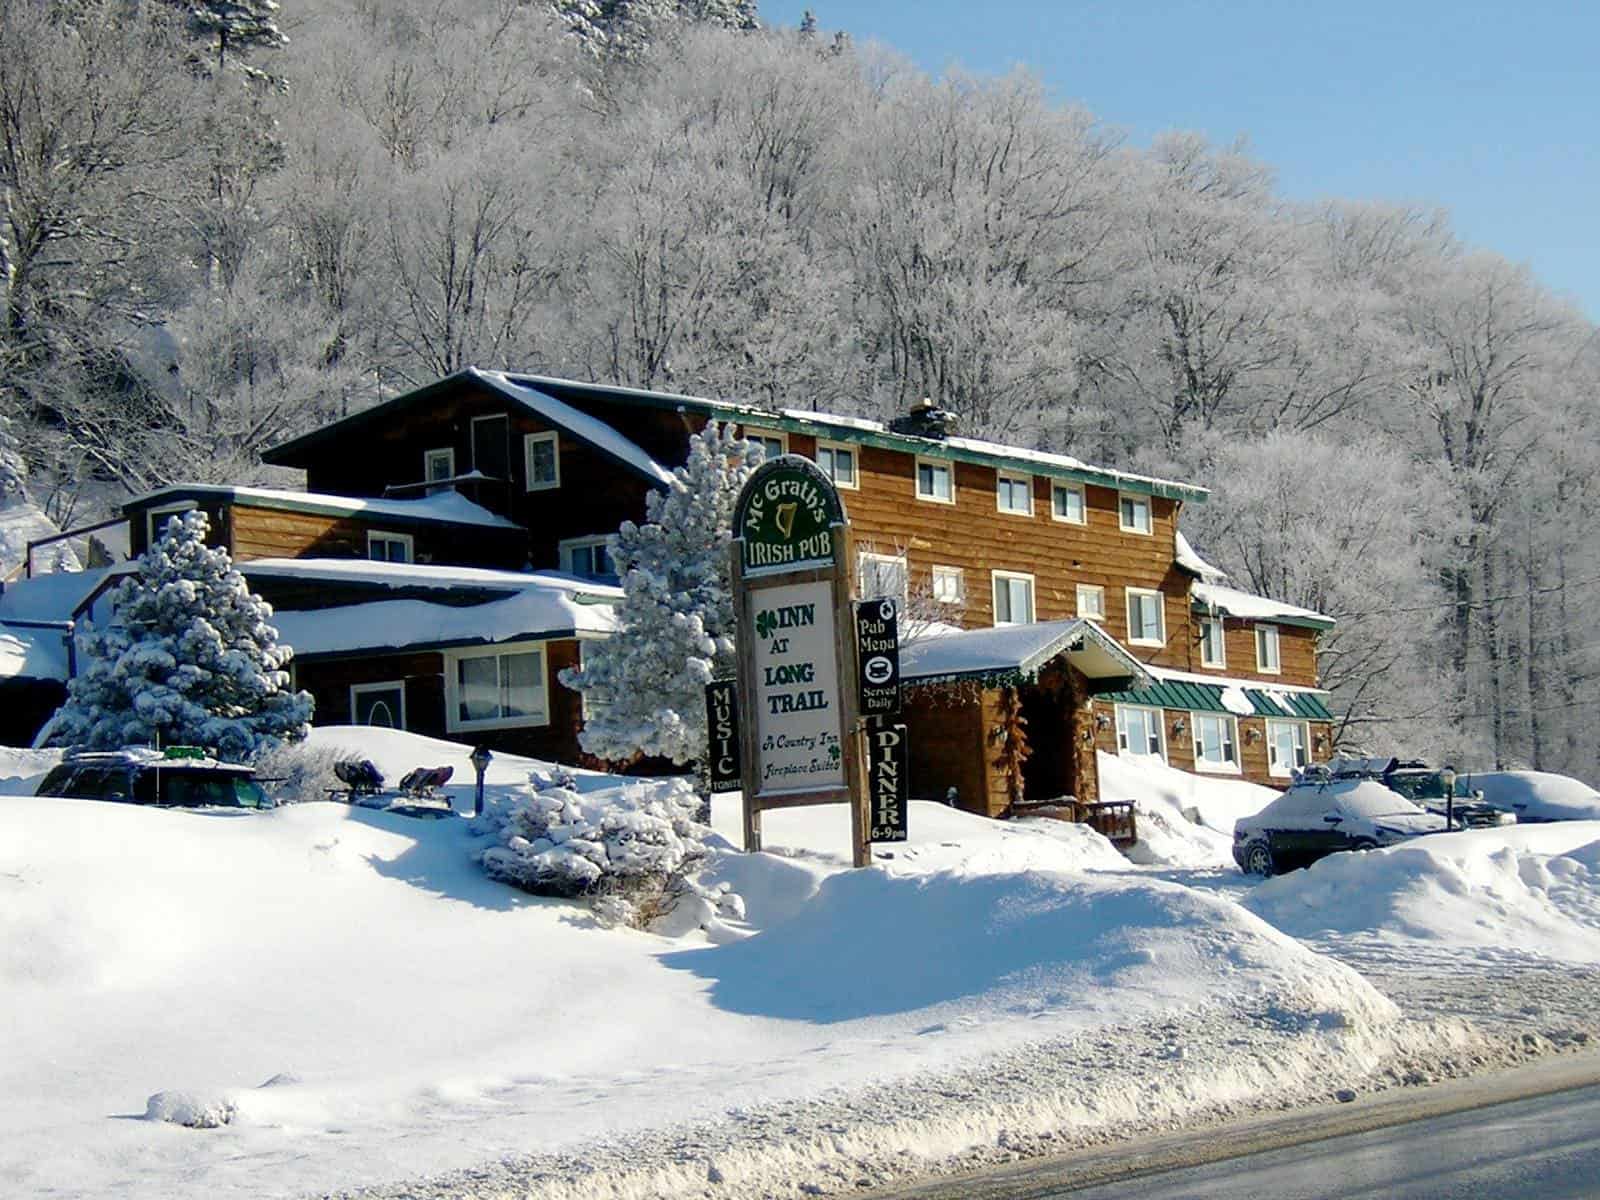 Inn at Long Trail - Winter Exterior Entrance with Sign